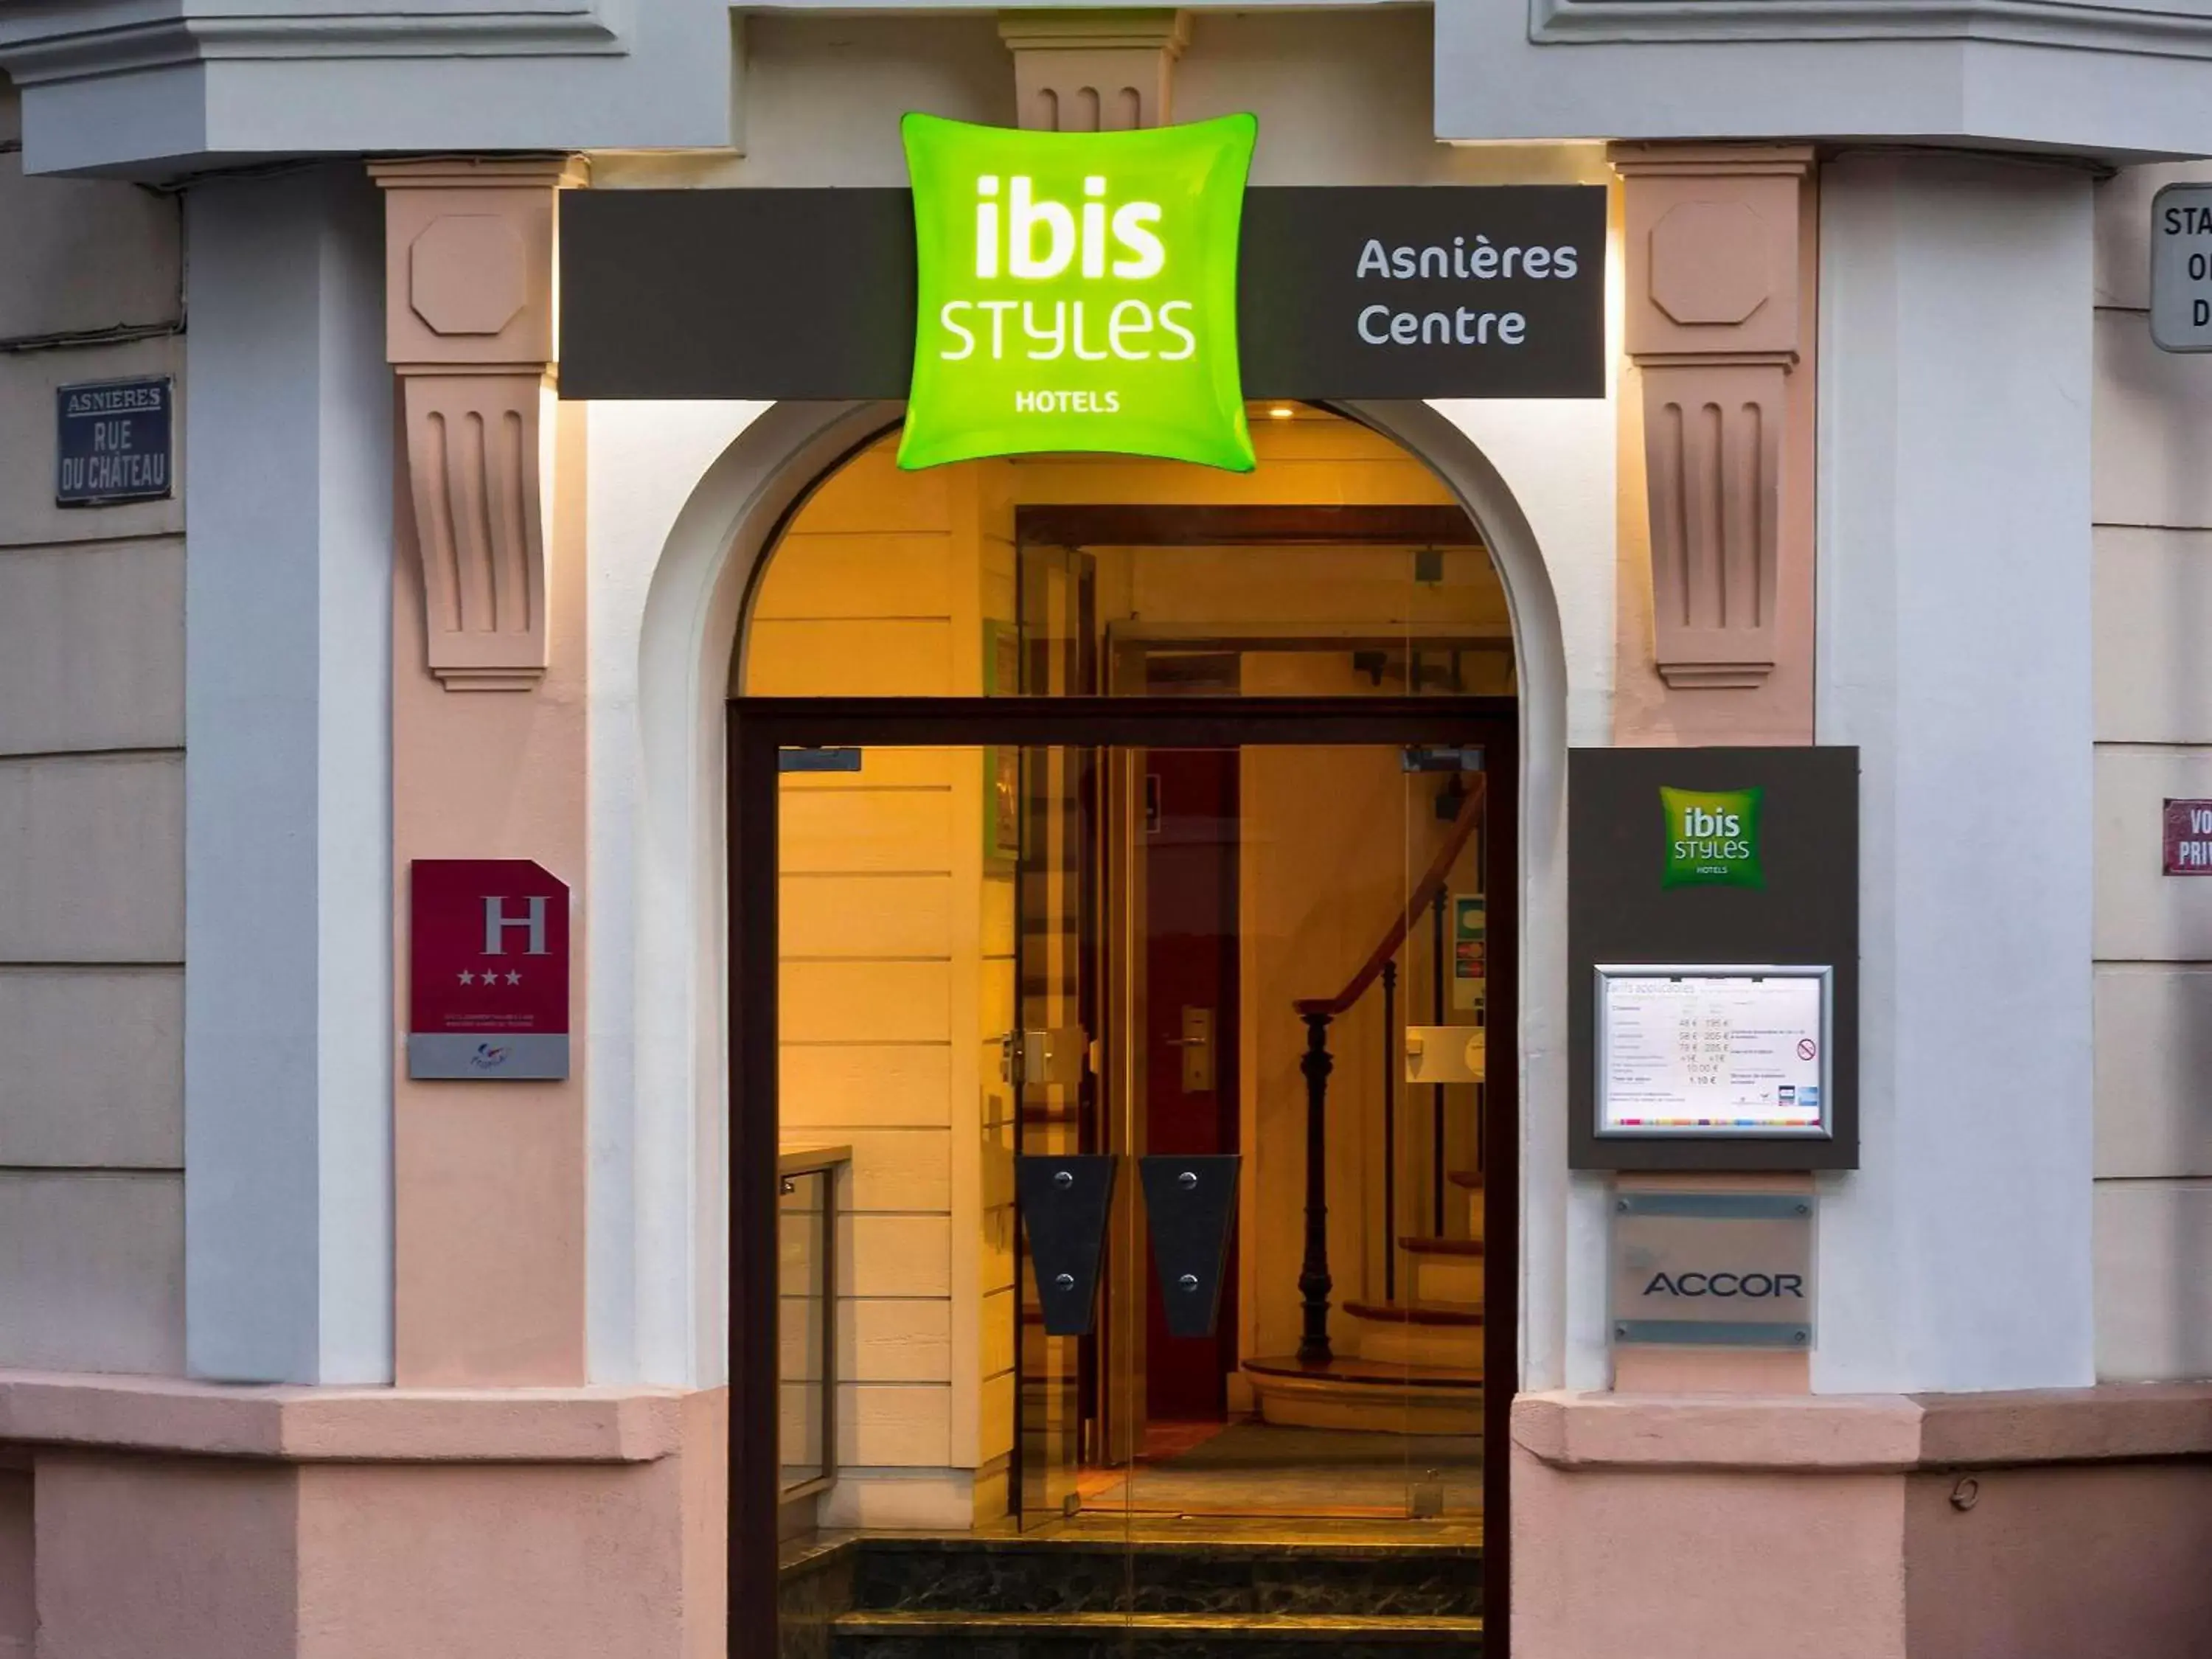 Property building in ibis Styles Asnieres Centre